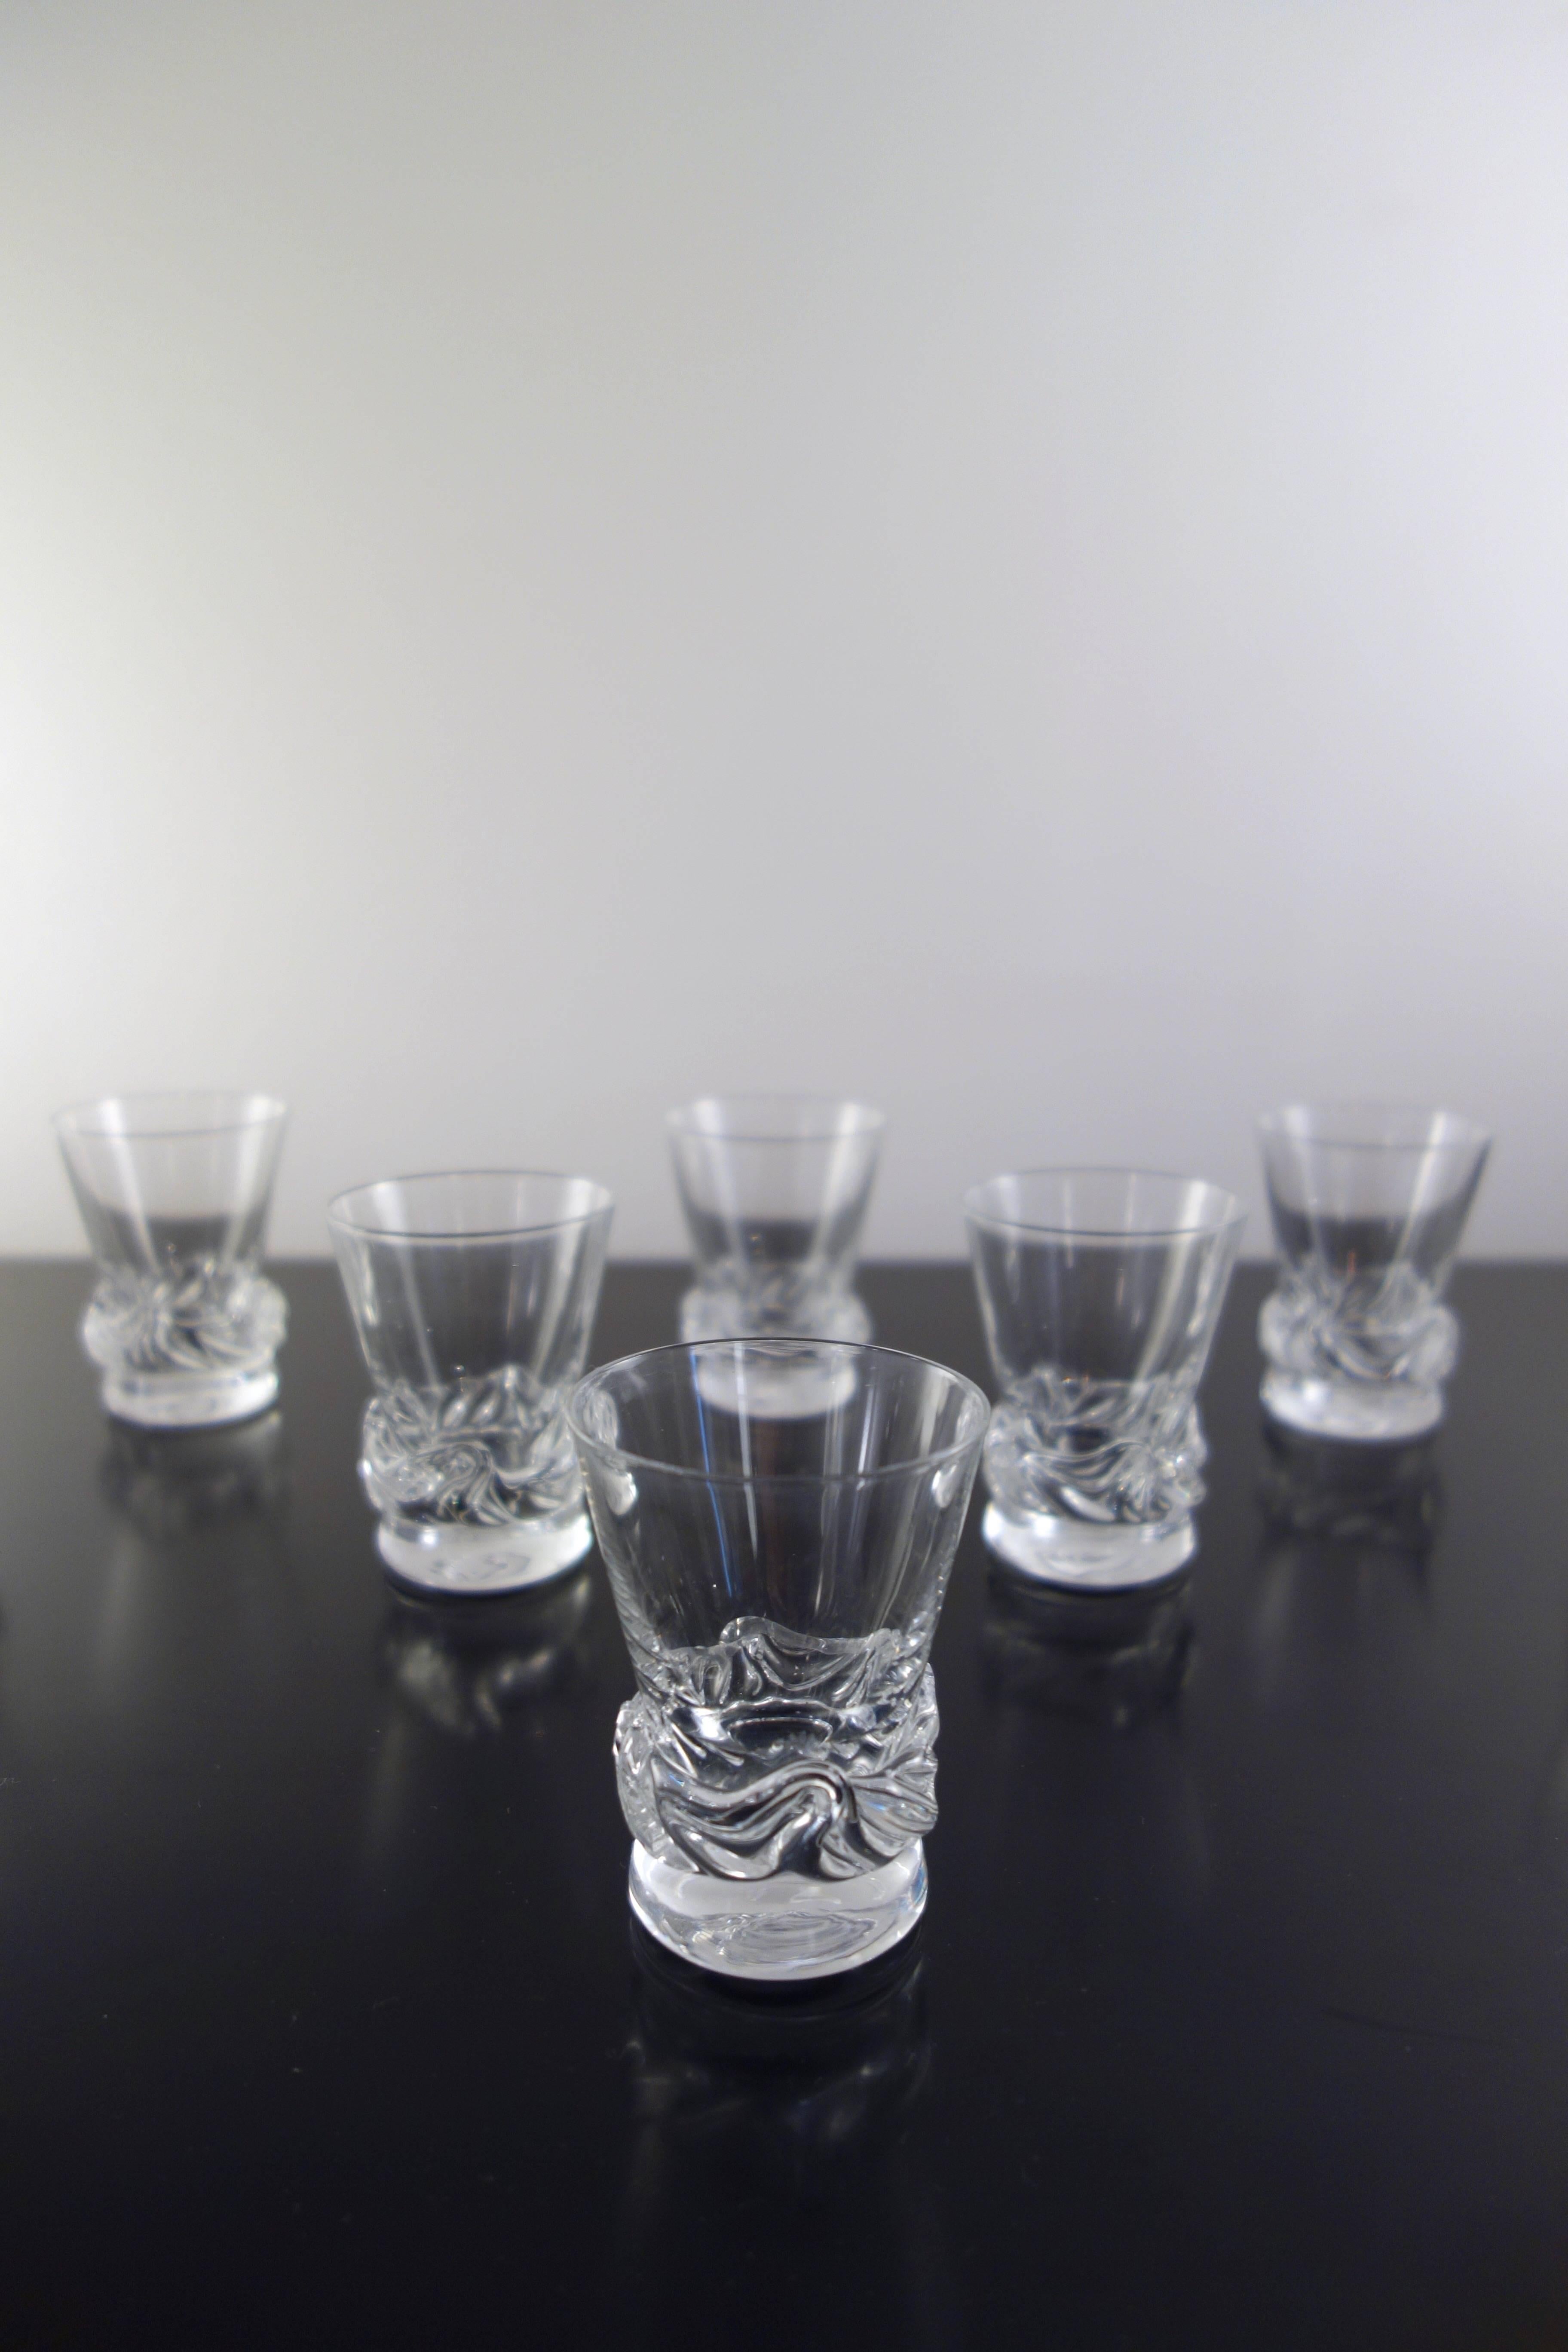 Set of eight Daum crystal glasses. Sorcy model, small size, cooked wine glass (porto, liquor ...) French manufacture of the 1950s. Vintage box, beautiful brilliance of the crystal. In perfect condition and sign. Box size: 31 x 20 x 7 cm.